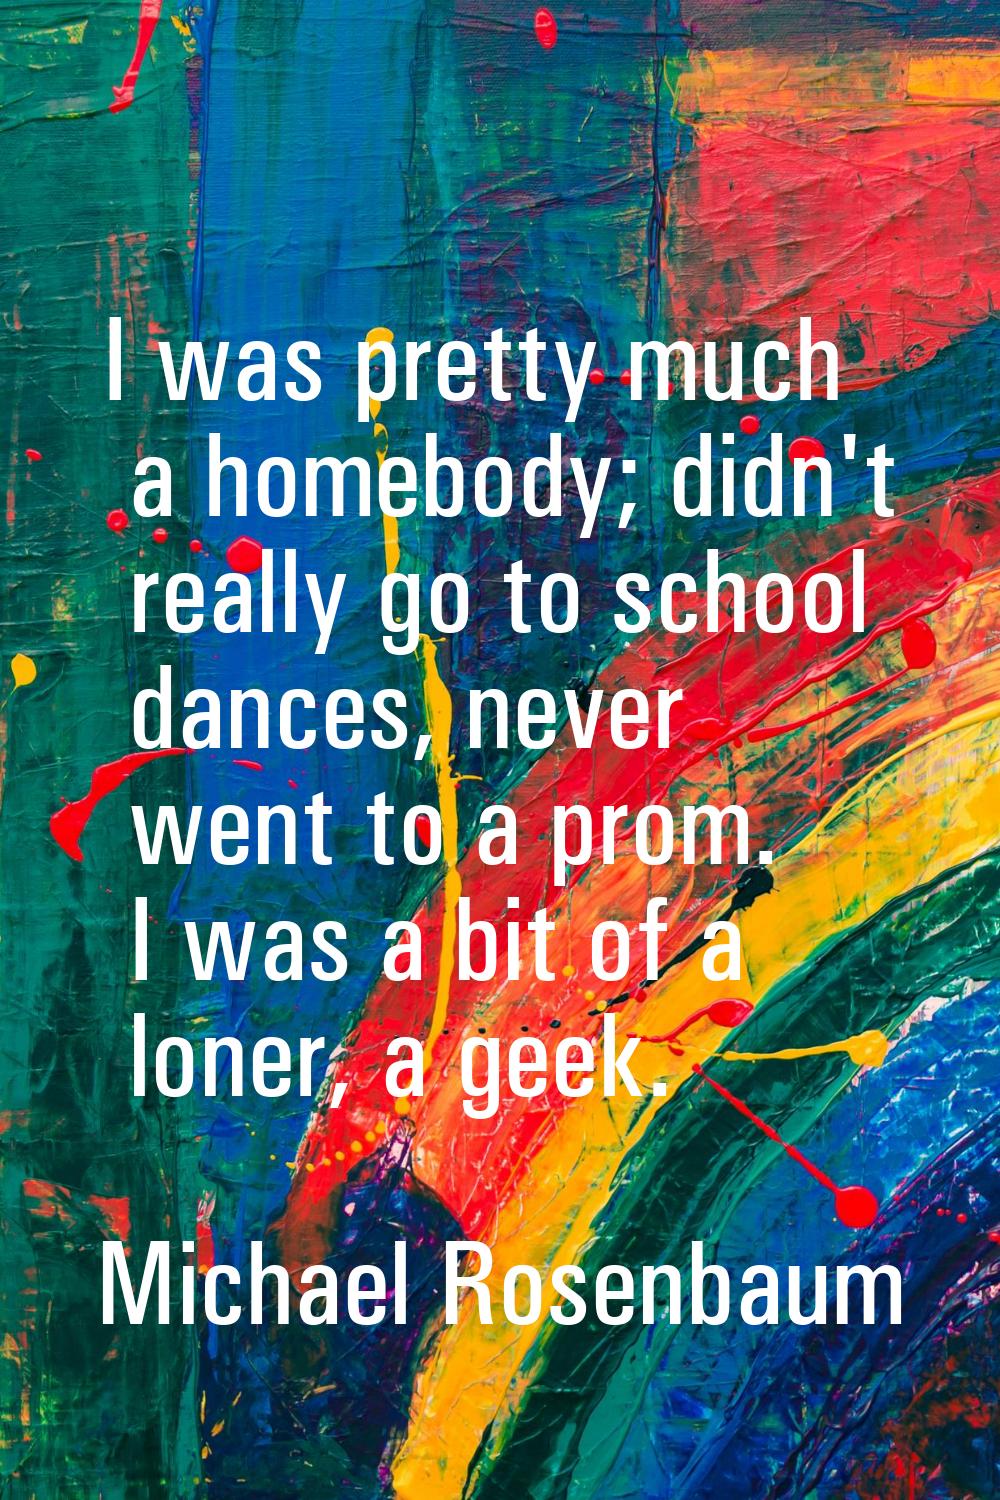 I was pretty much a homebody; didn't really go to school dances, never went to a prom. I was a bit 